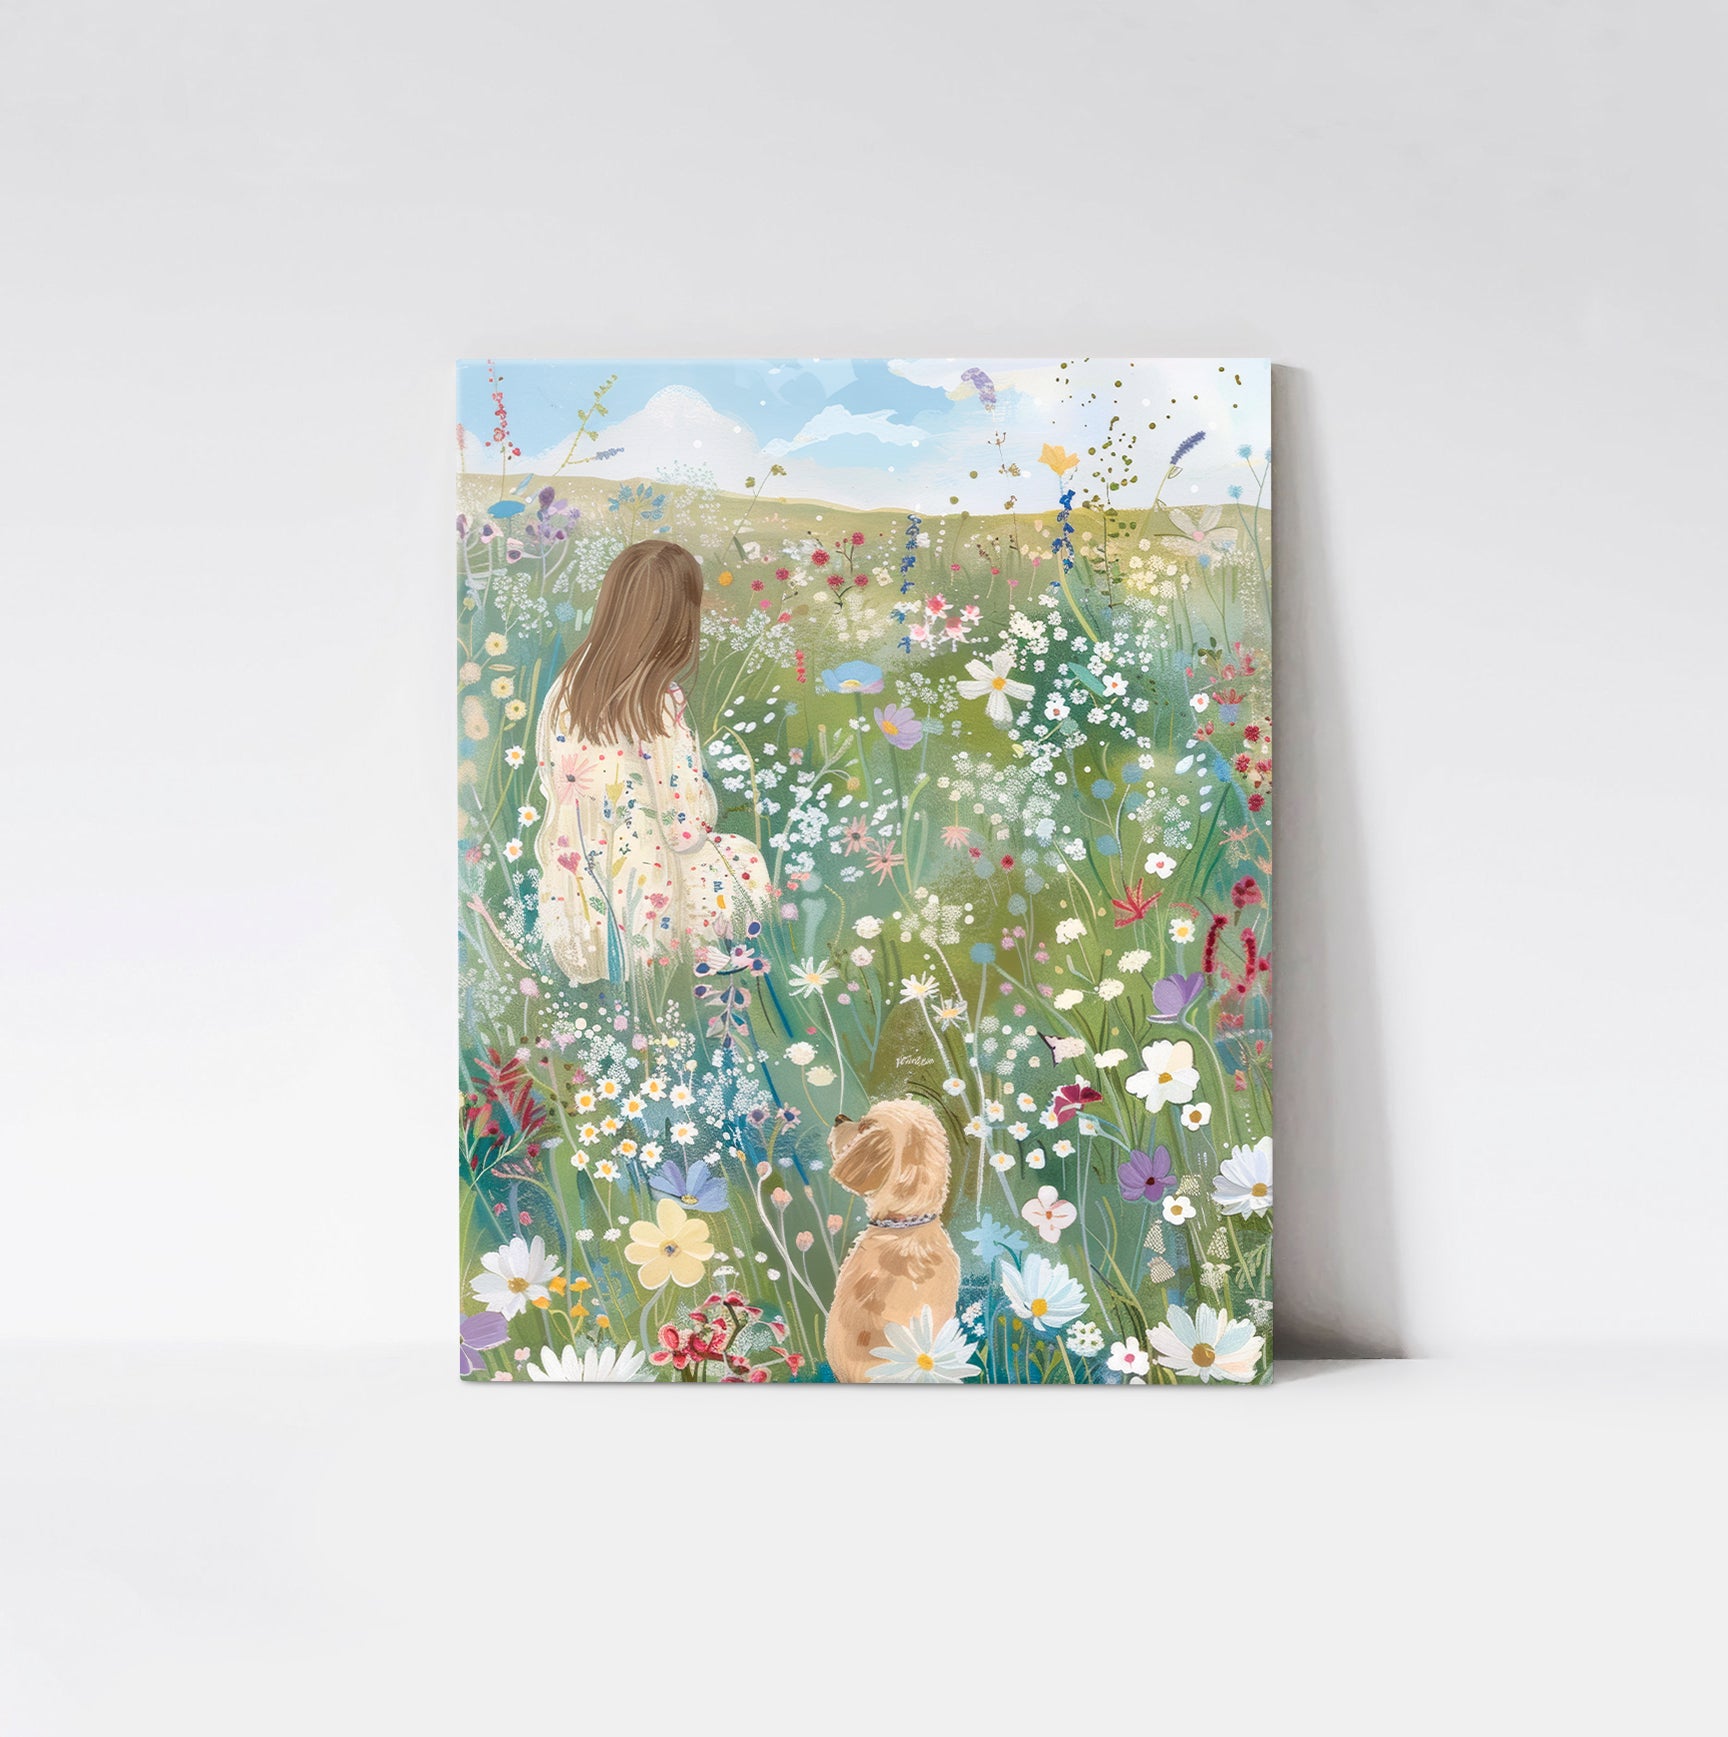  The "Field of Dreams" art print mounted on a wood board, depicting a serene scene of a girl and her dog in a lush wildflower field.